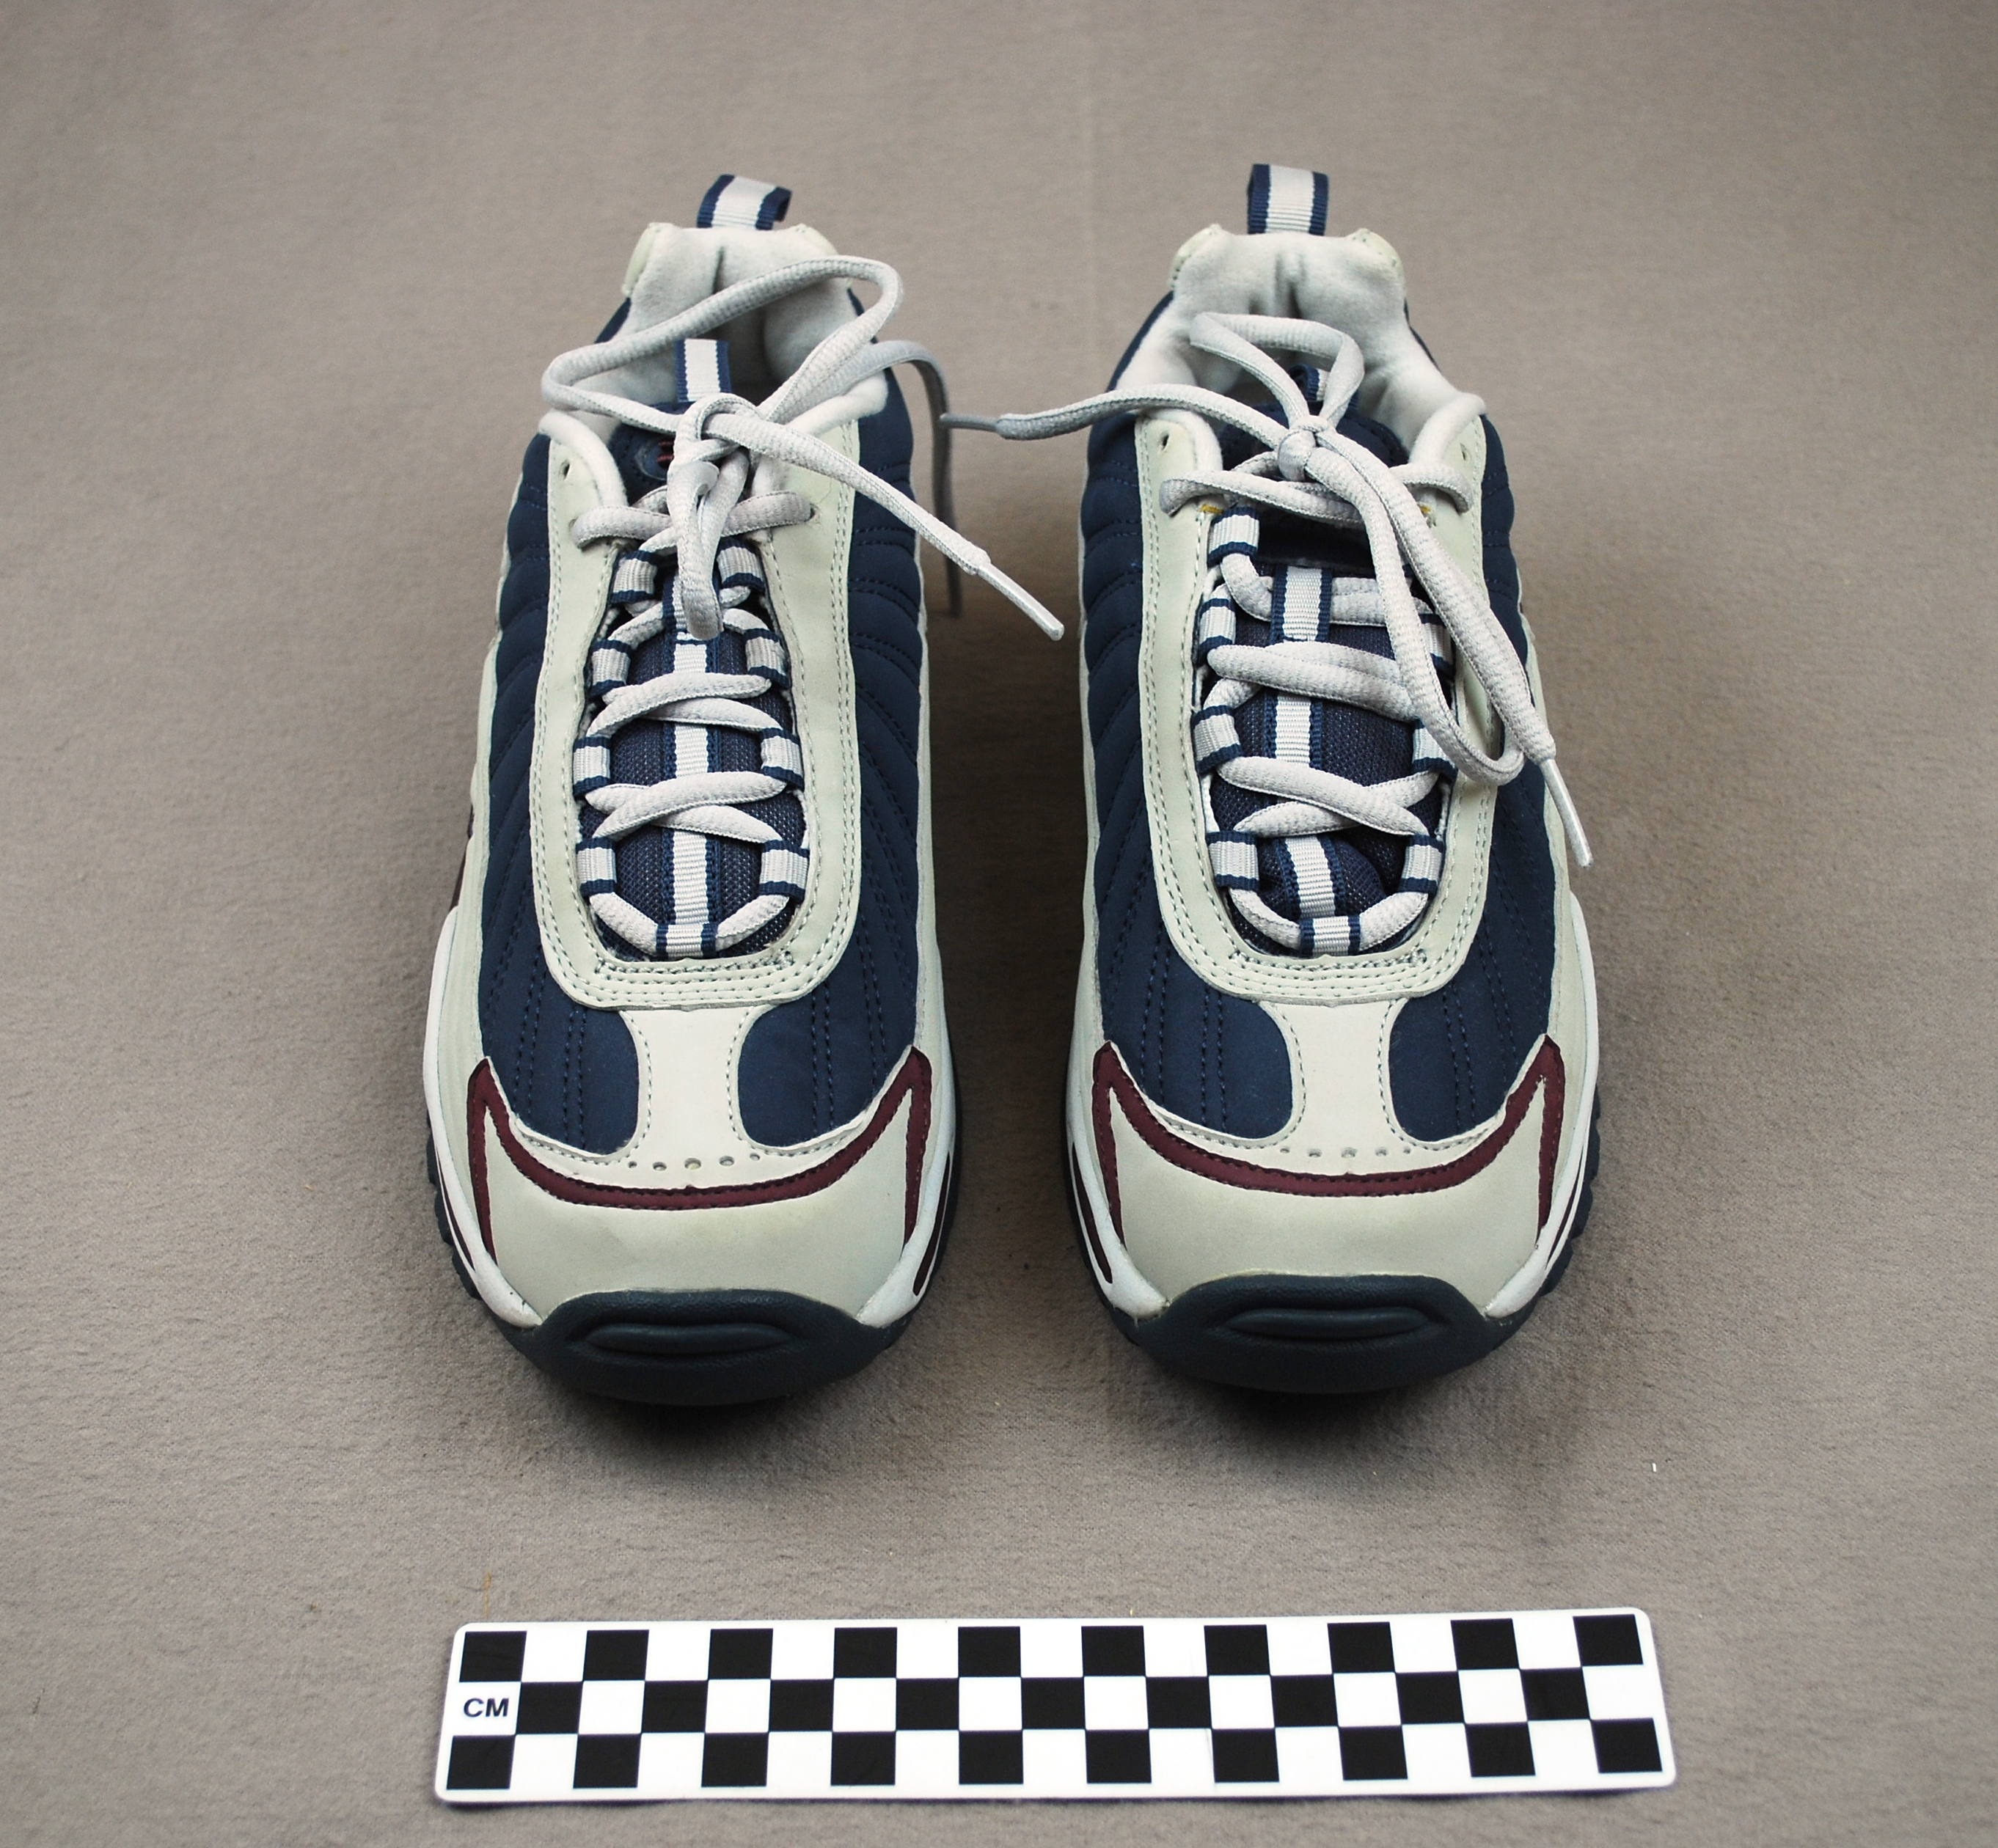 Object: Shoes (First Lady Laura Bush’s Nike cross training shoes) | UTSA Institute Of Texan Cultures